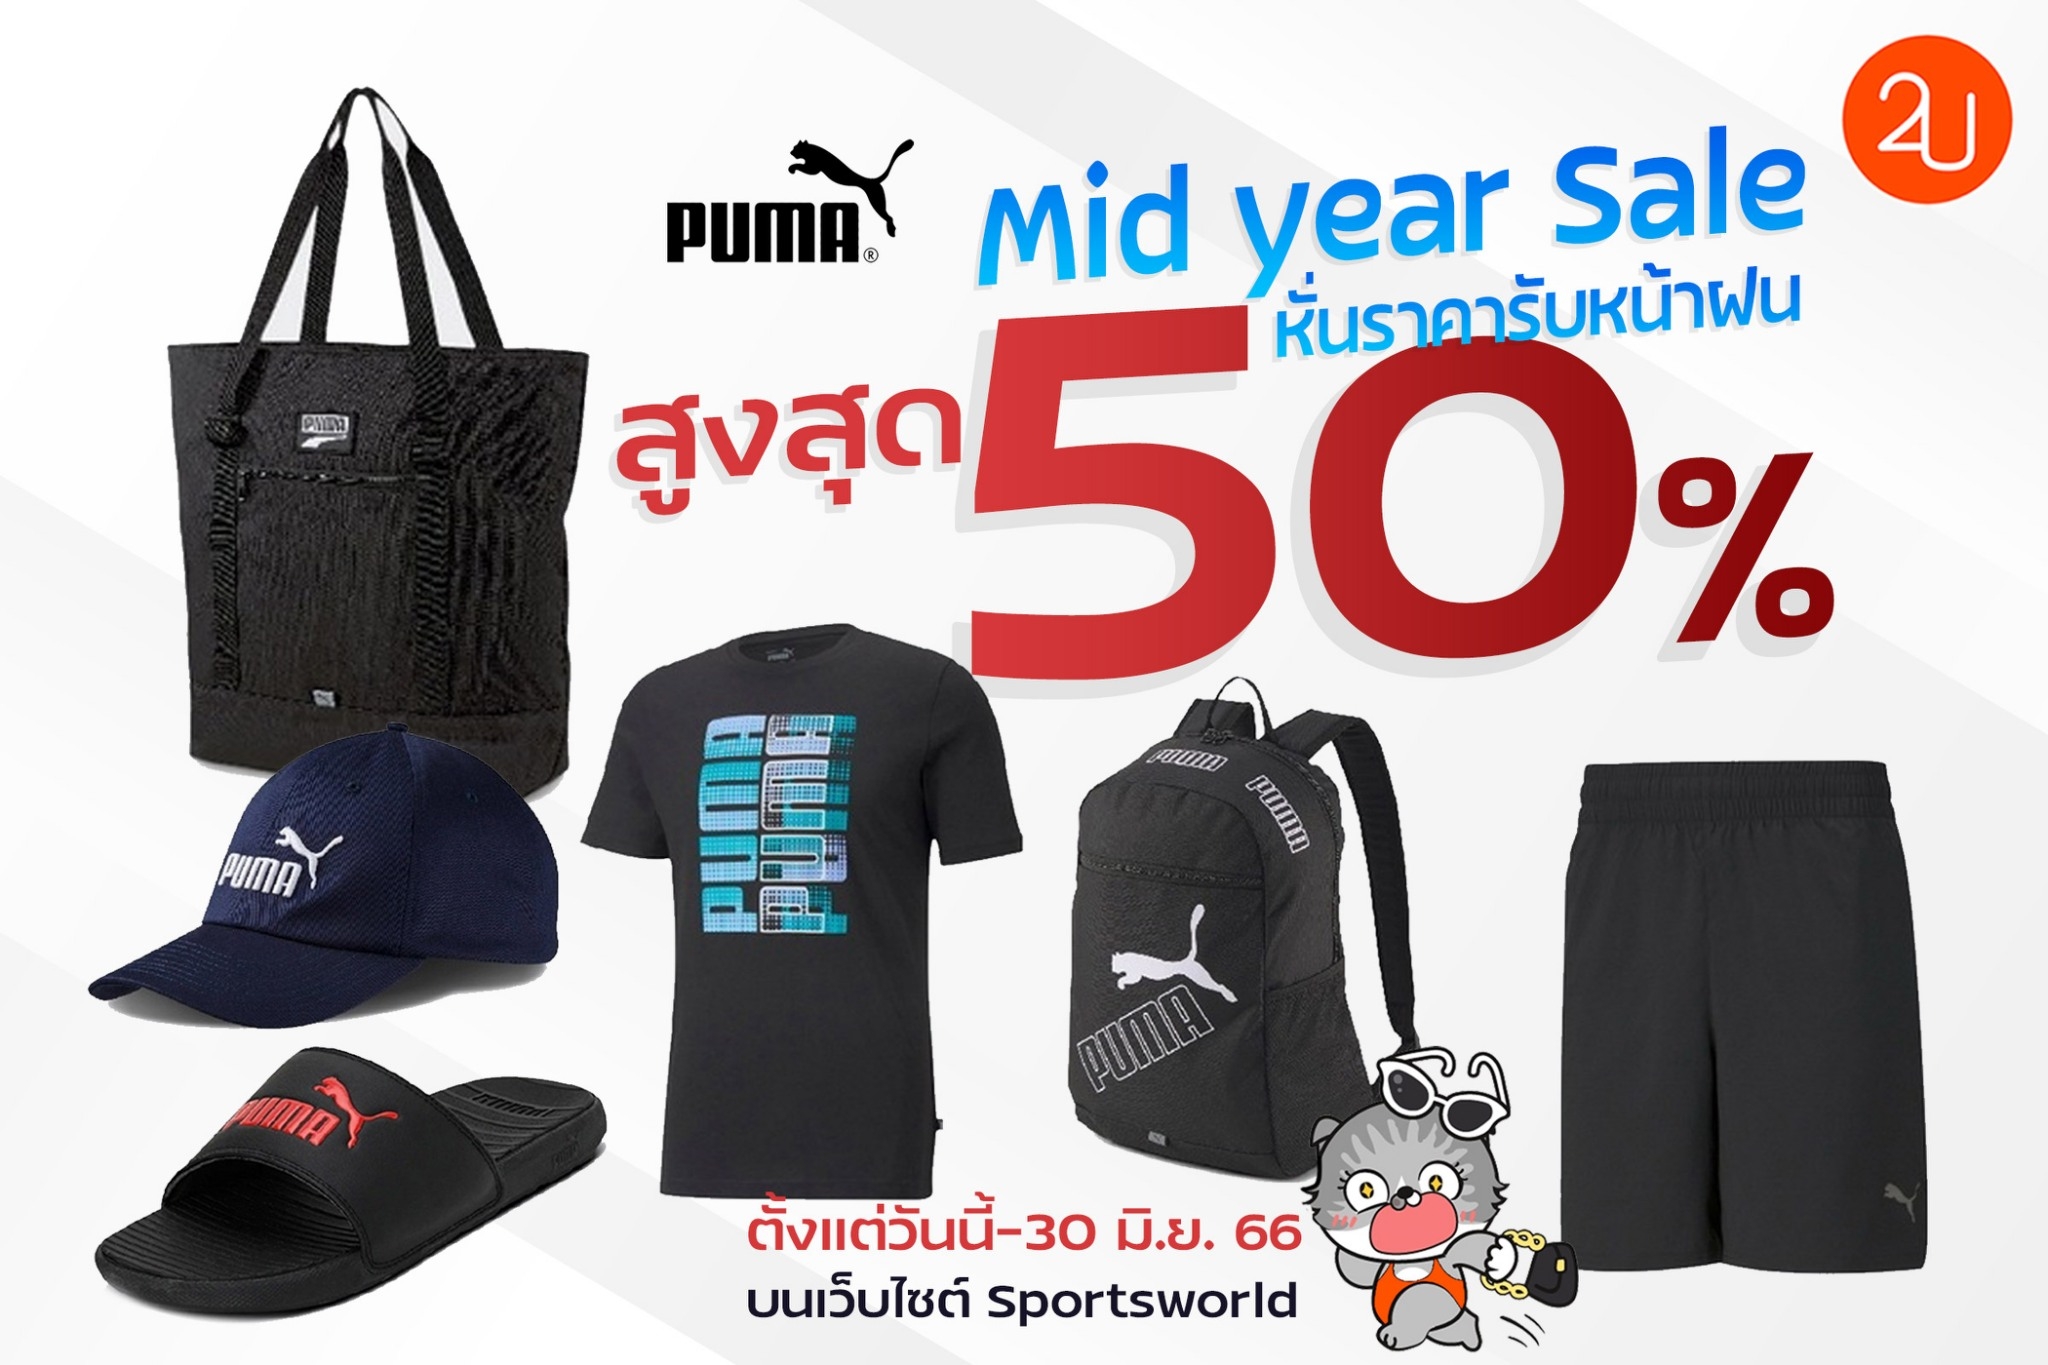 promotion puma mid year sale 3023 up to 50 off P01